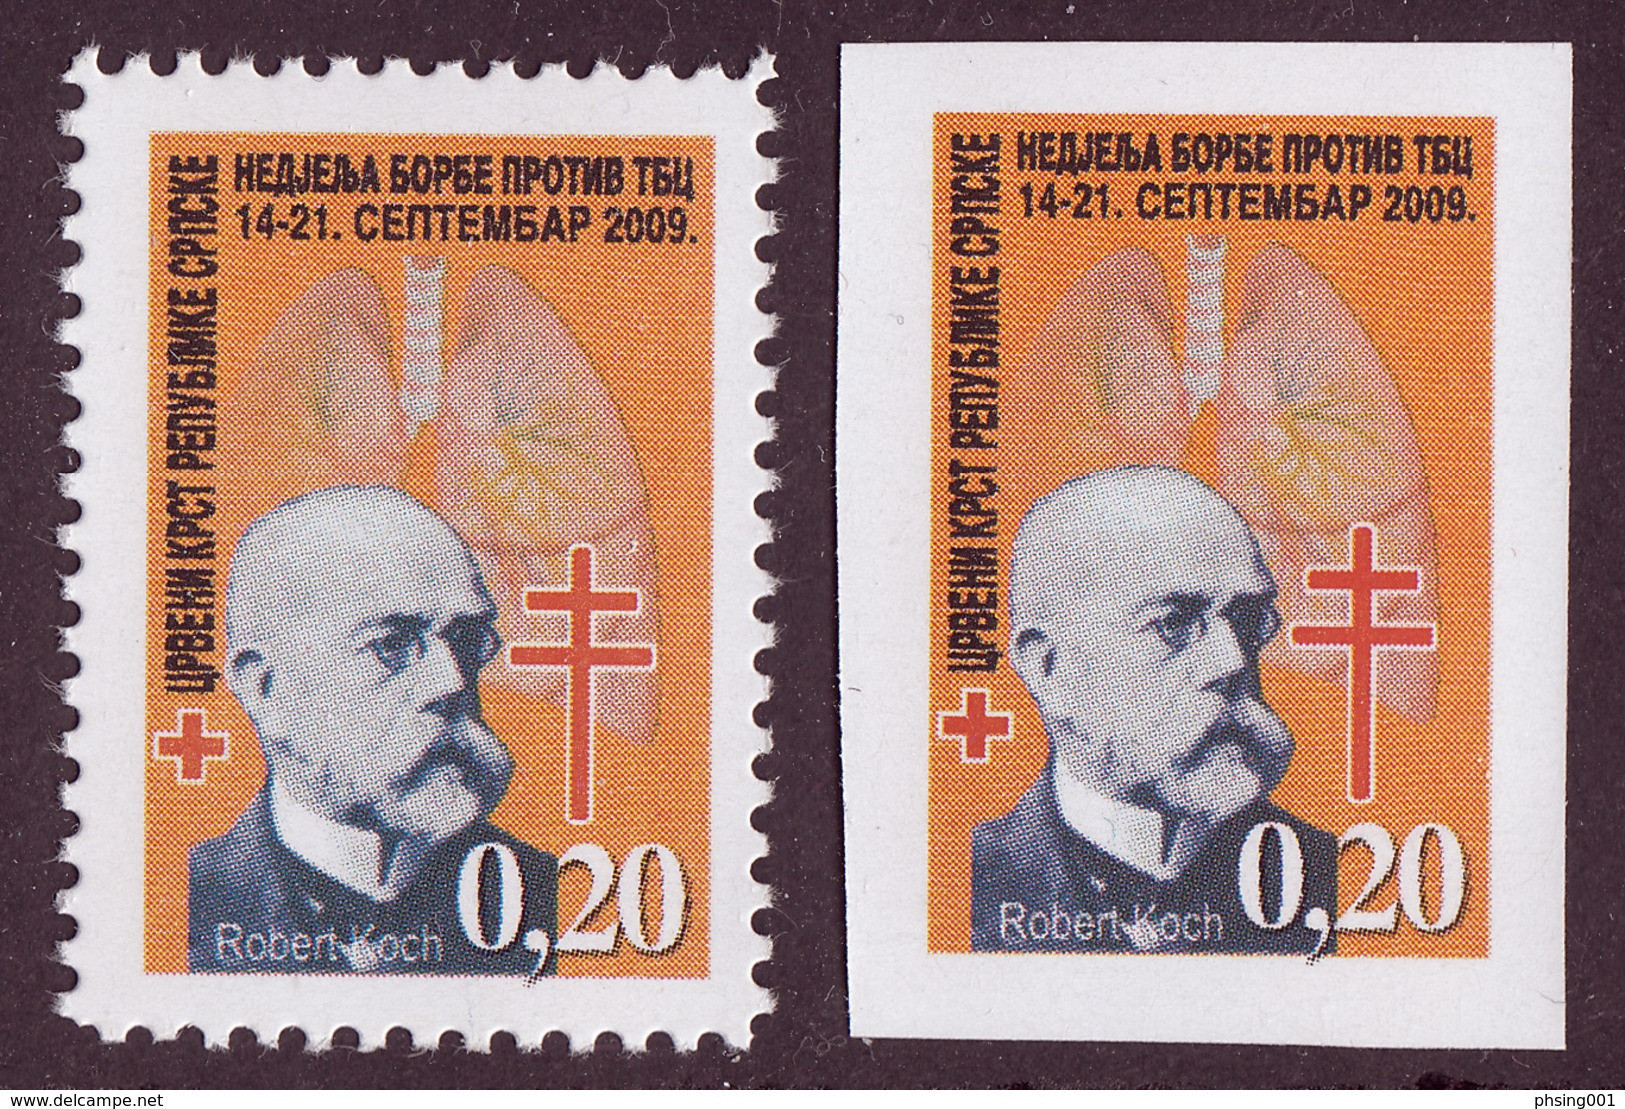 Bosnia Serbia 2009 TBC Tuberculosis Red Cross Robert Koch, Tax Charity Surcharge Stamps Perforated + Imperforated MNH - Bosnië En Herzegovina